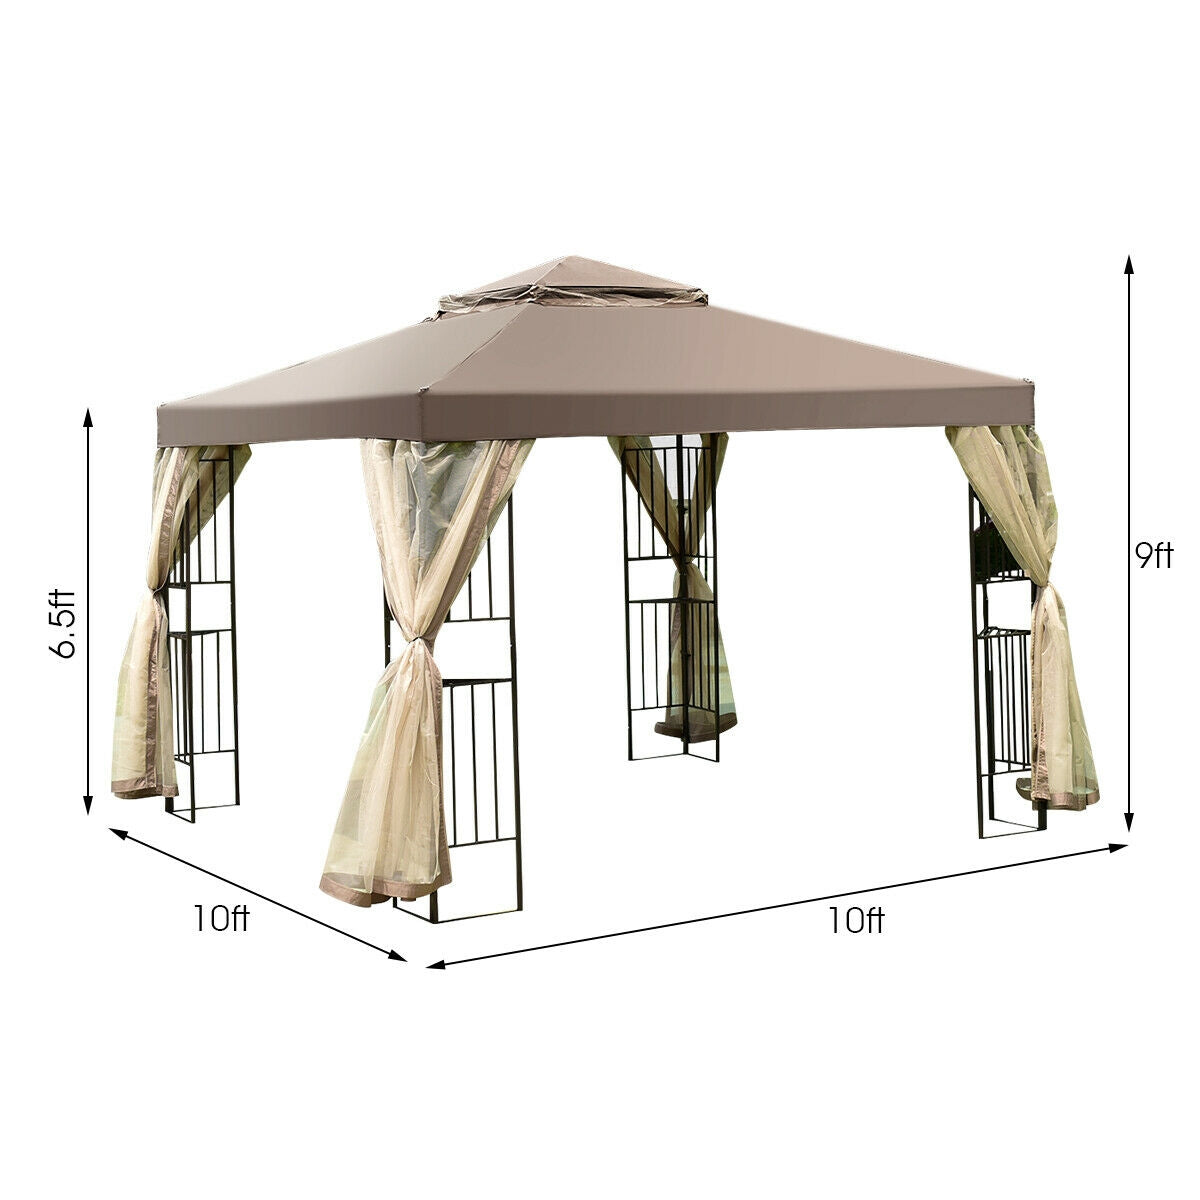 10 x 10 Feet Awning Patio Screw-free Structure Canopy Tent